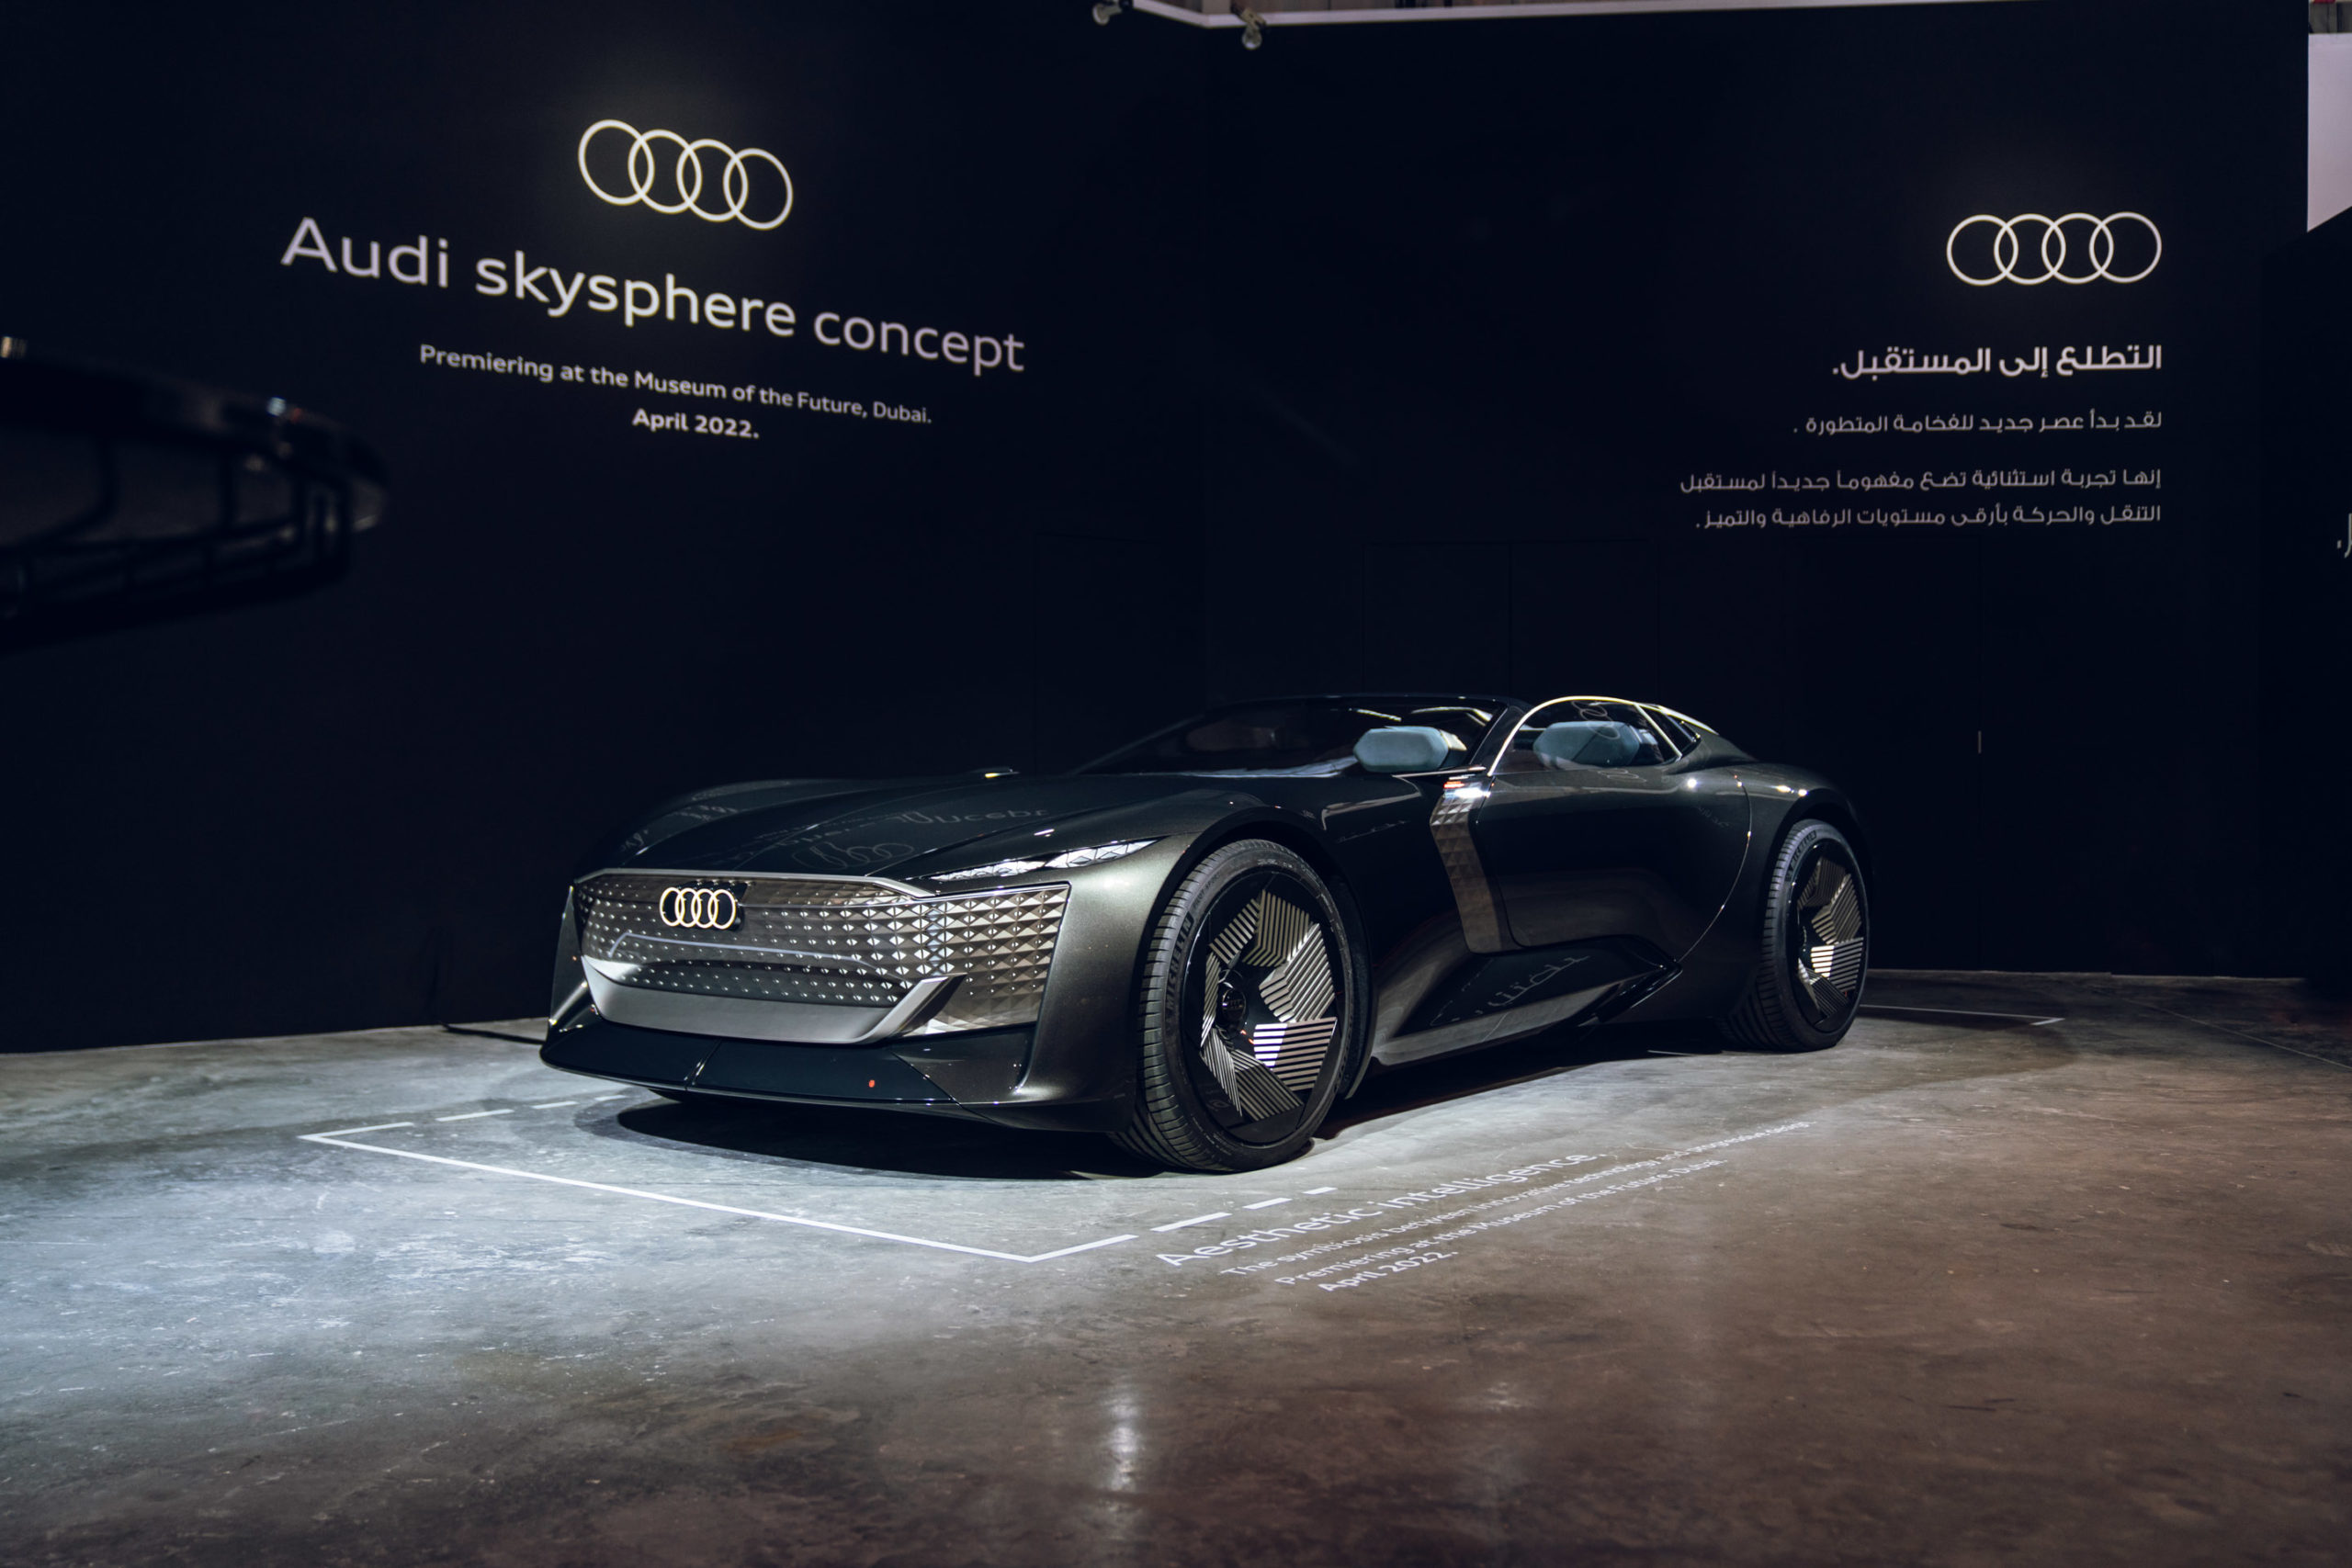 In Dubai, the Audi Skysphere concept makes its formal Middle Eastern premiere